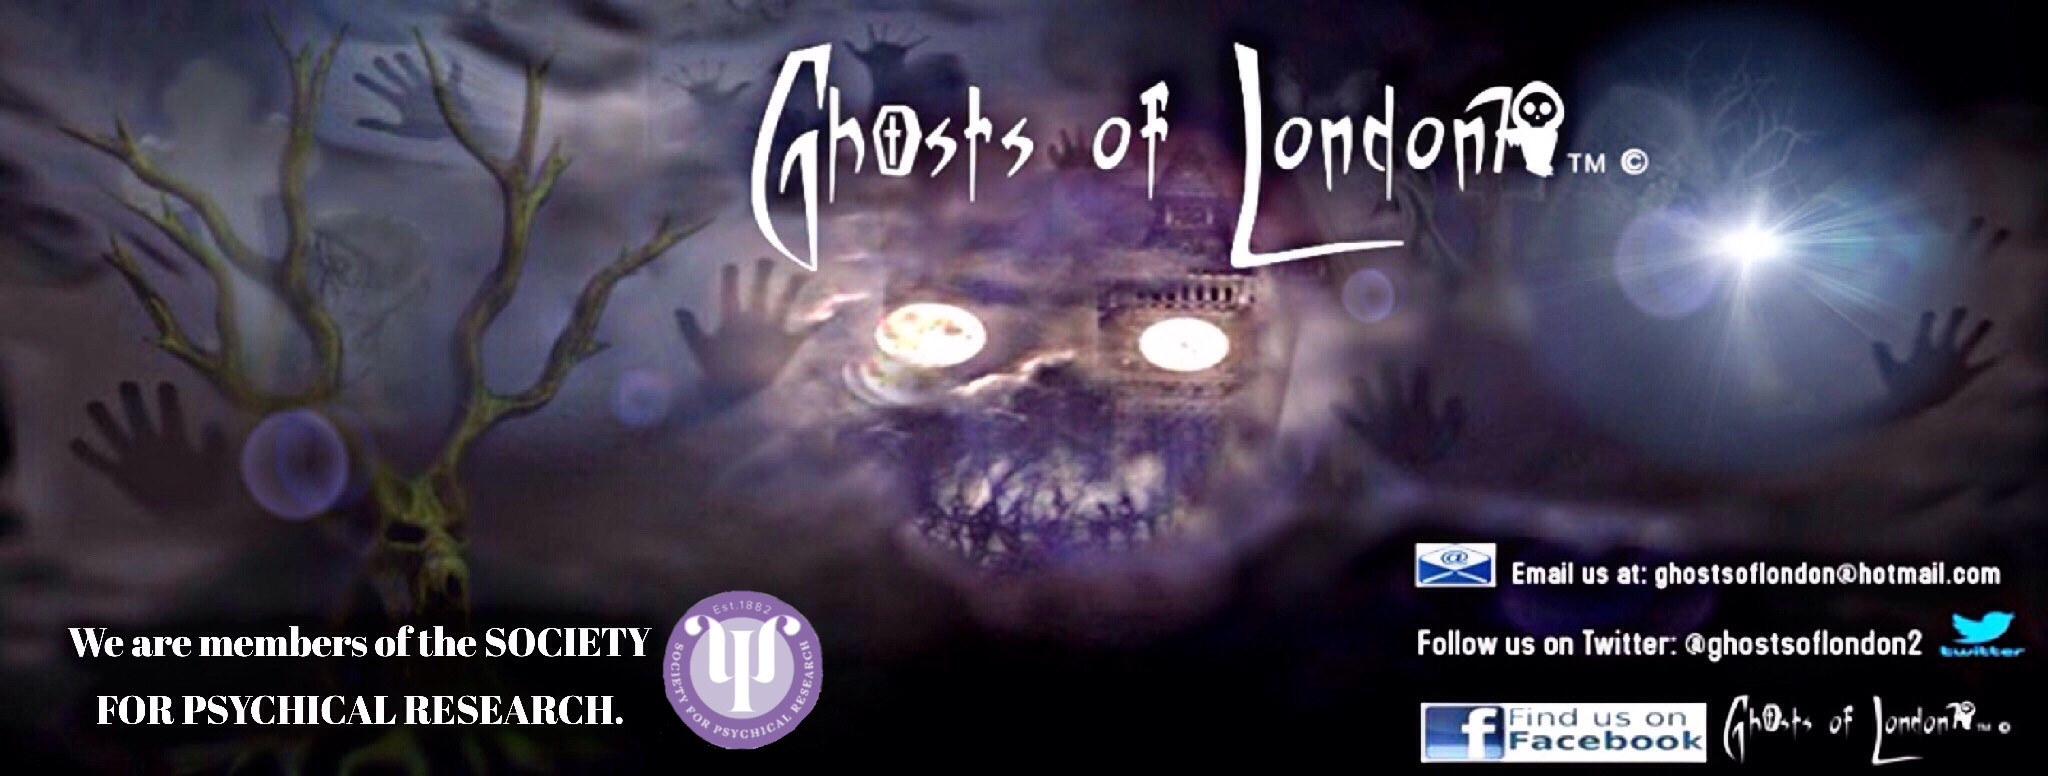 Ghosts of London